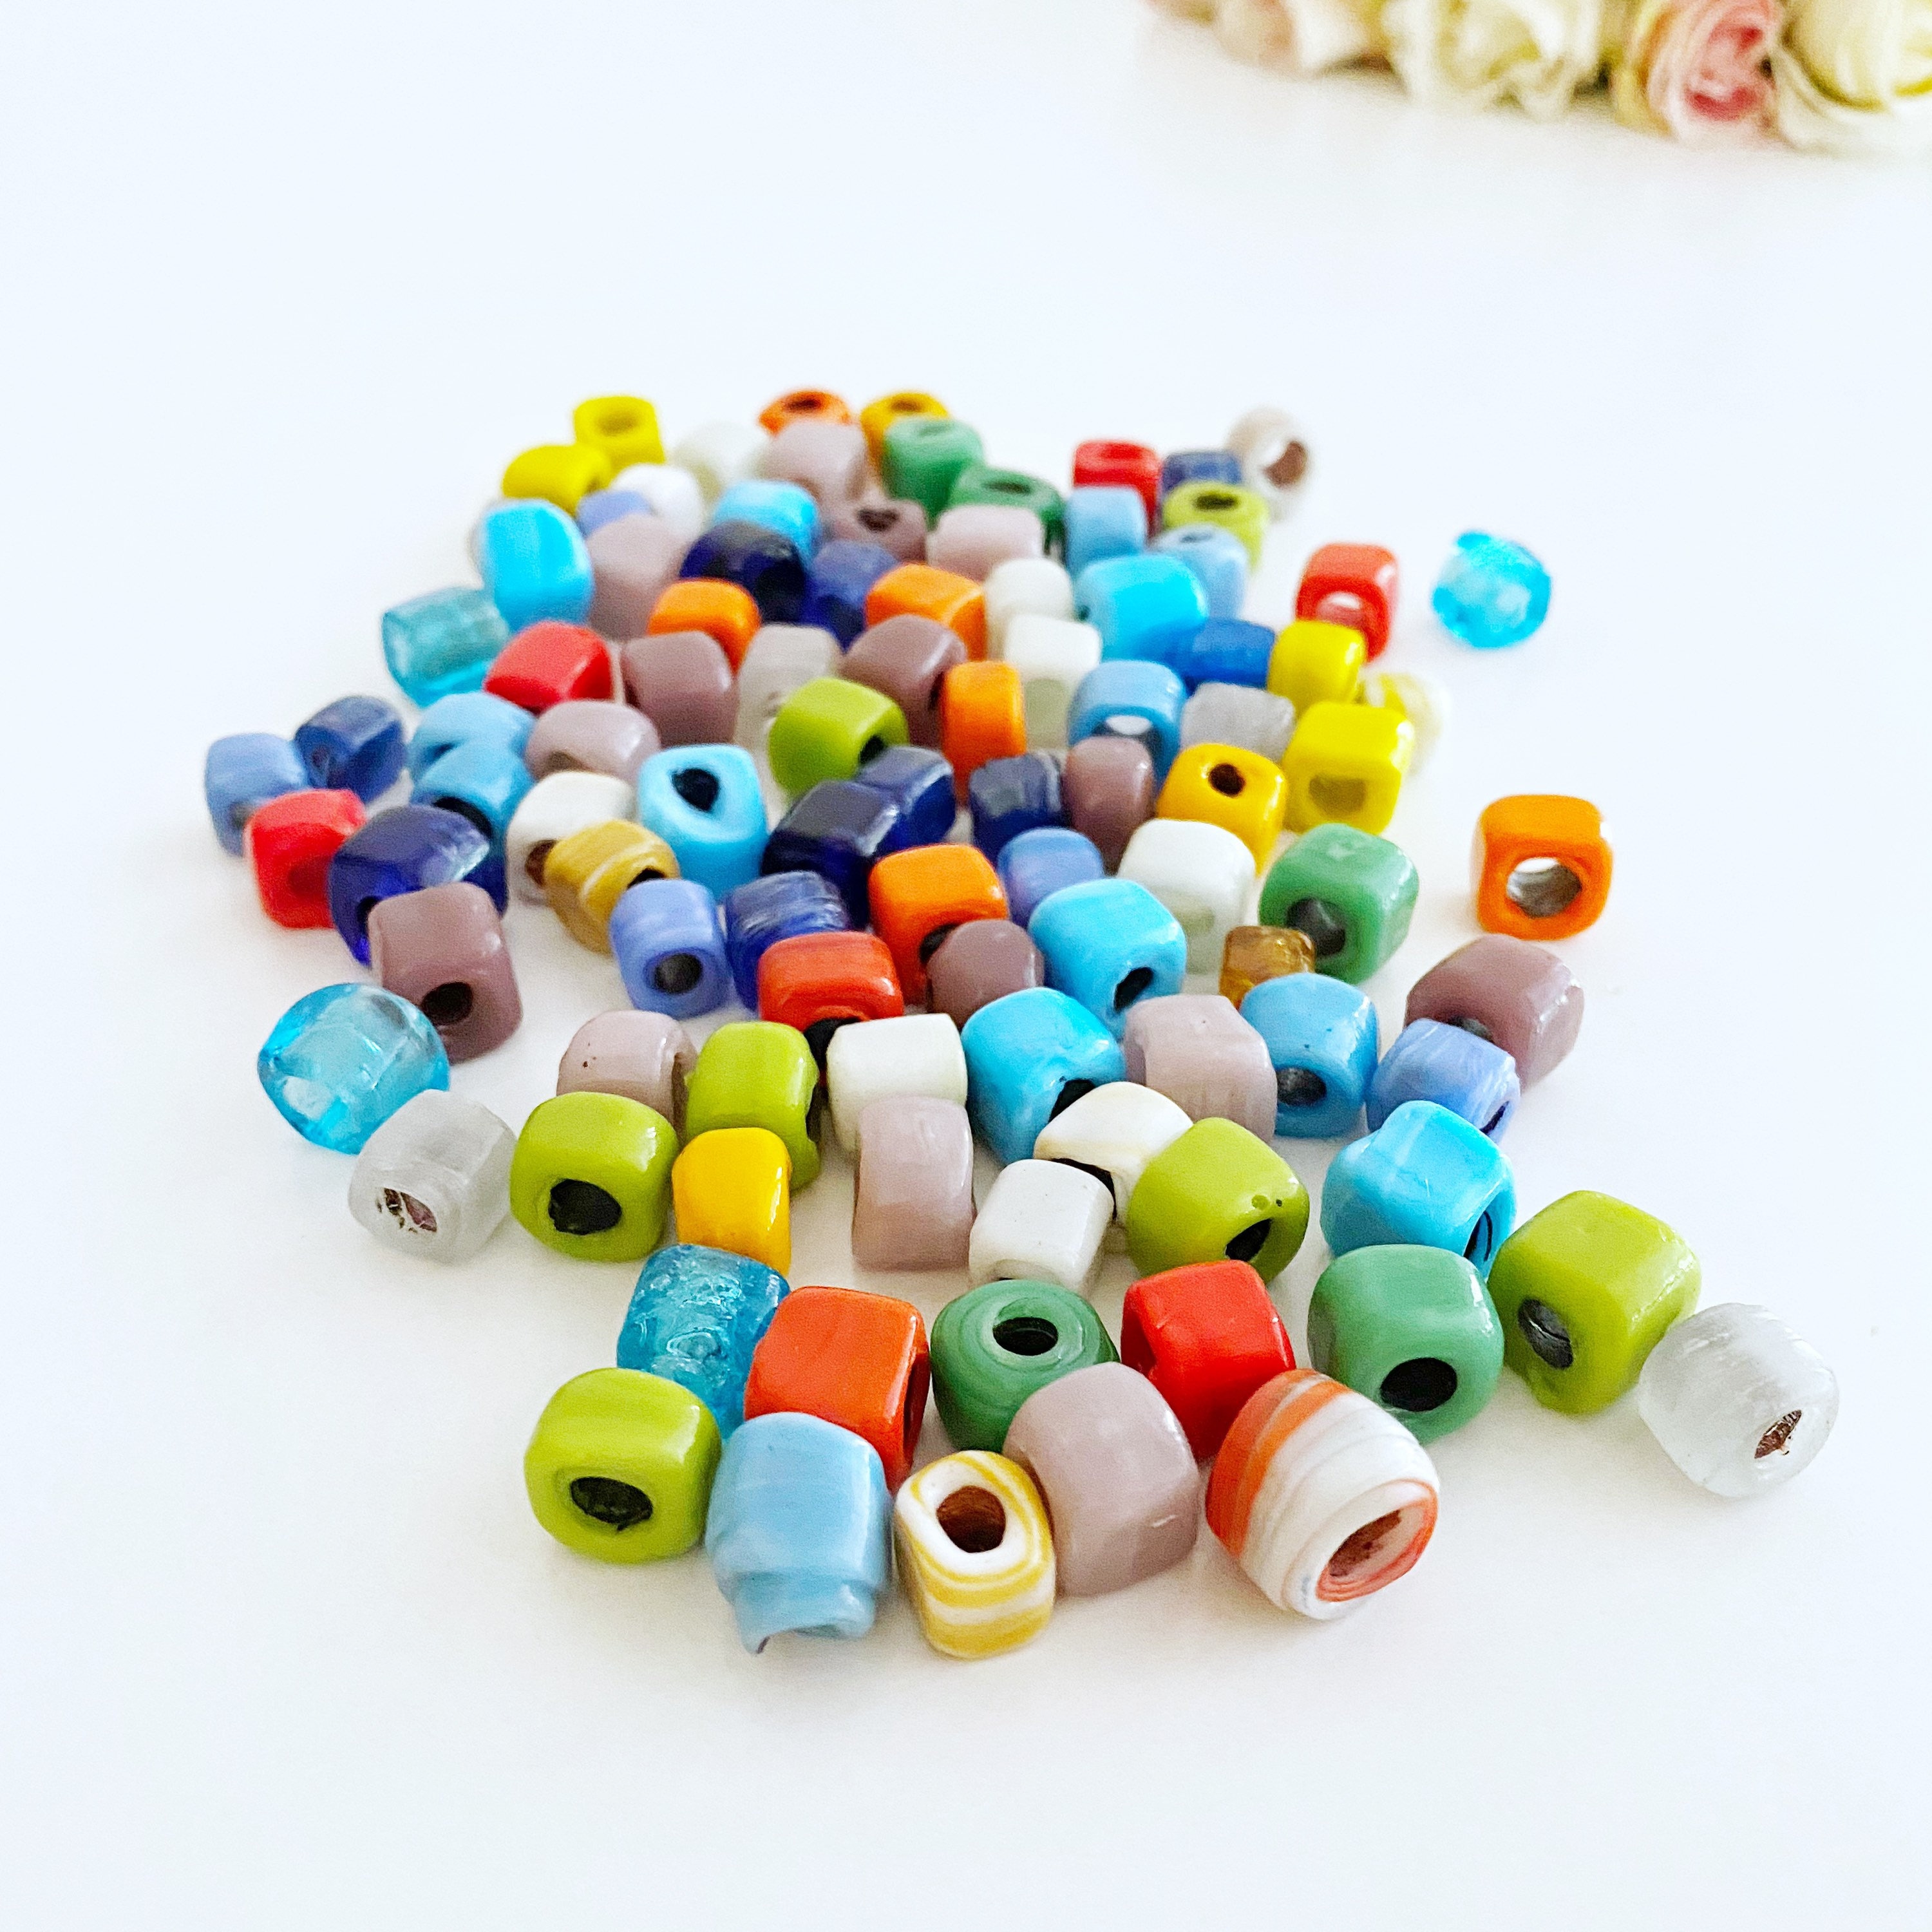 Glass Beads Assorted Glass Beads Assorted Beads 8mm Beads 8mm Glass Beads  BULK Beads Large Lot Mixed Beads Marble Beads 55 Pieces 